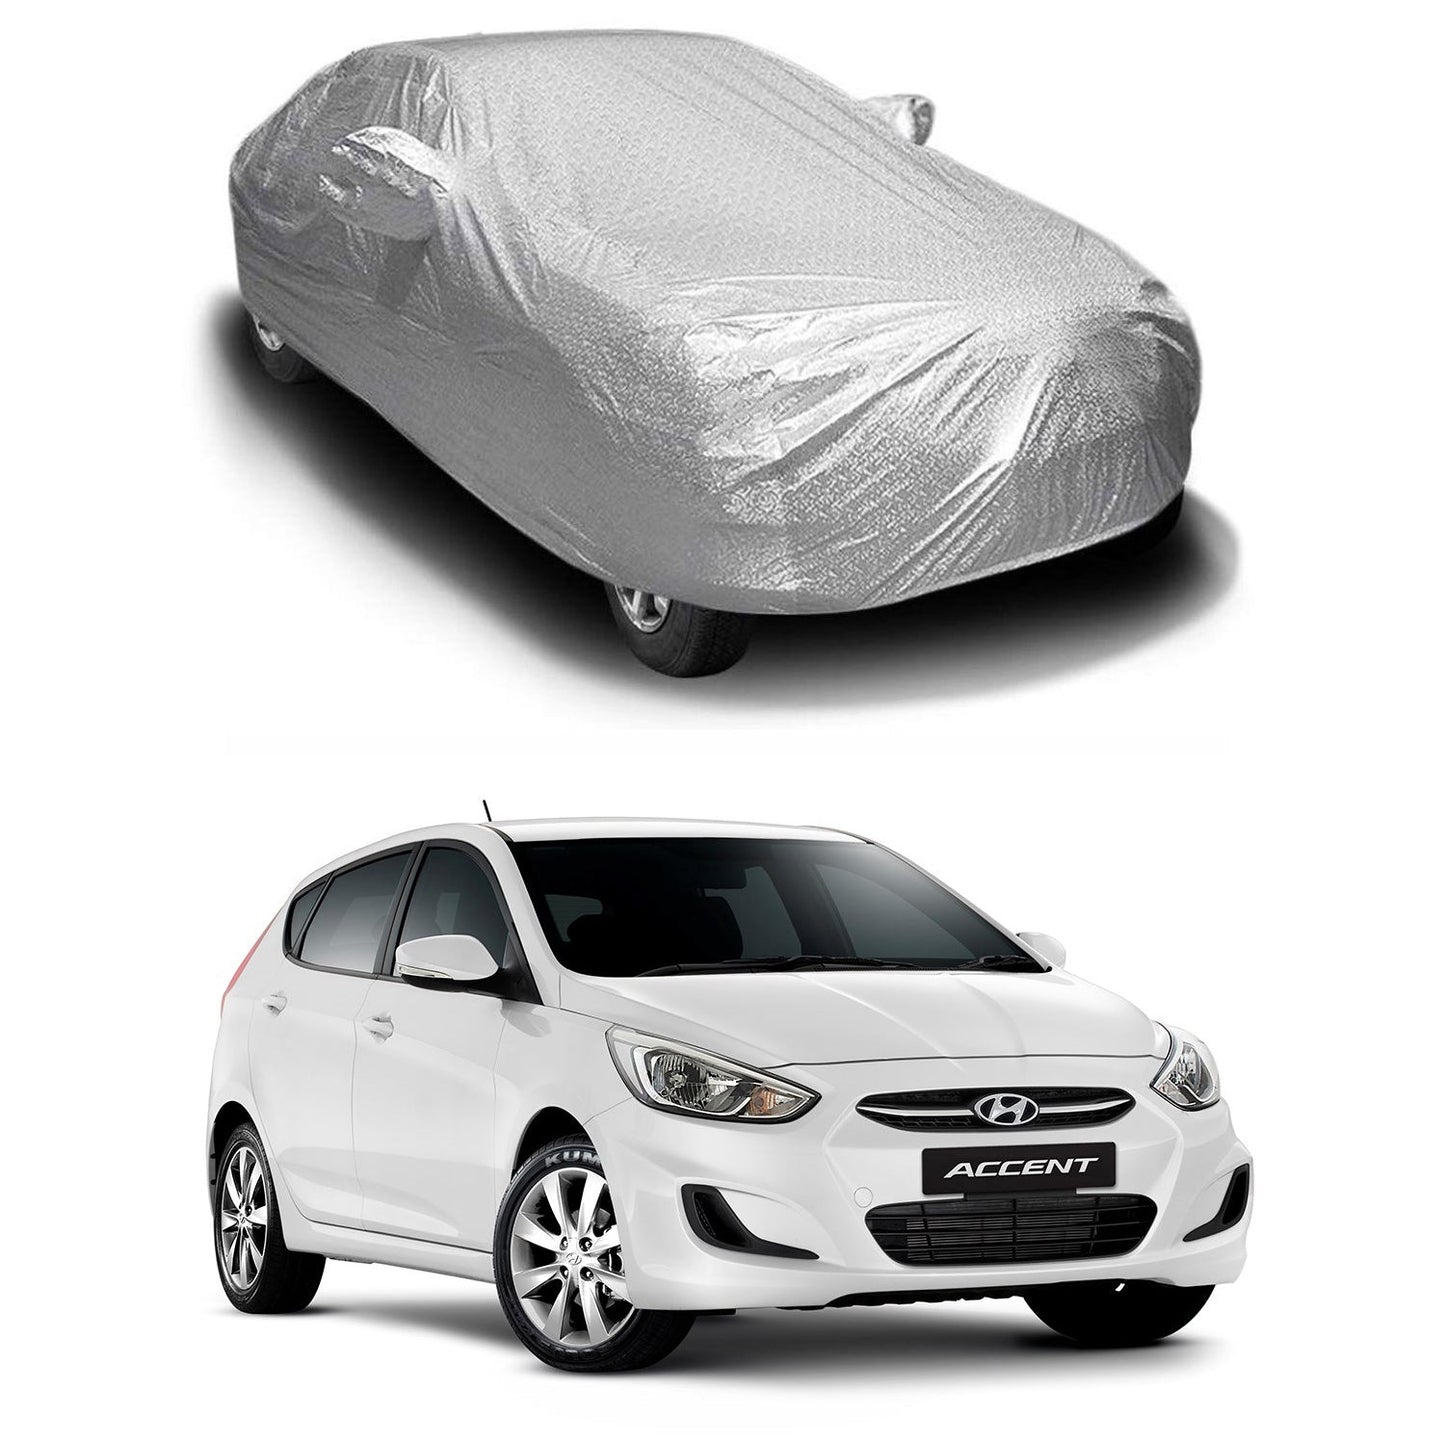 Oshotto Spyro Silver Anti Reflective, dustproof and Water Proof Car Body Cover with Mirror Pockets For Hyundai Accent